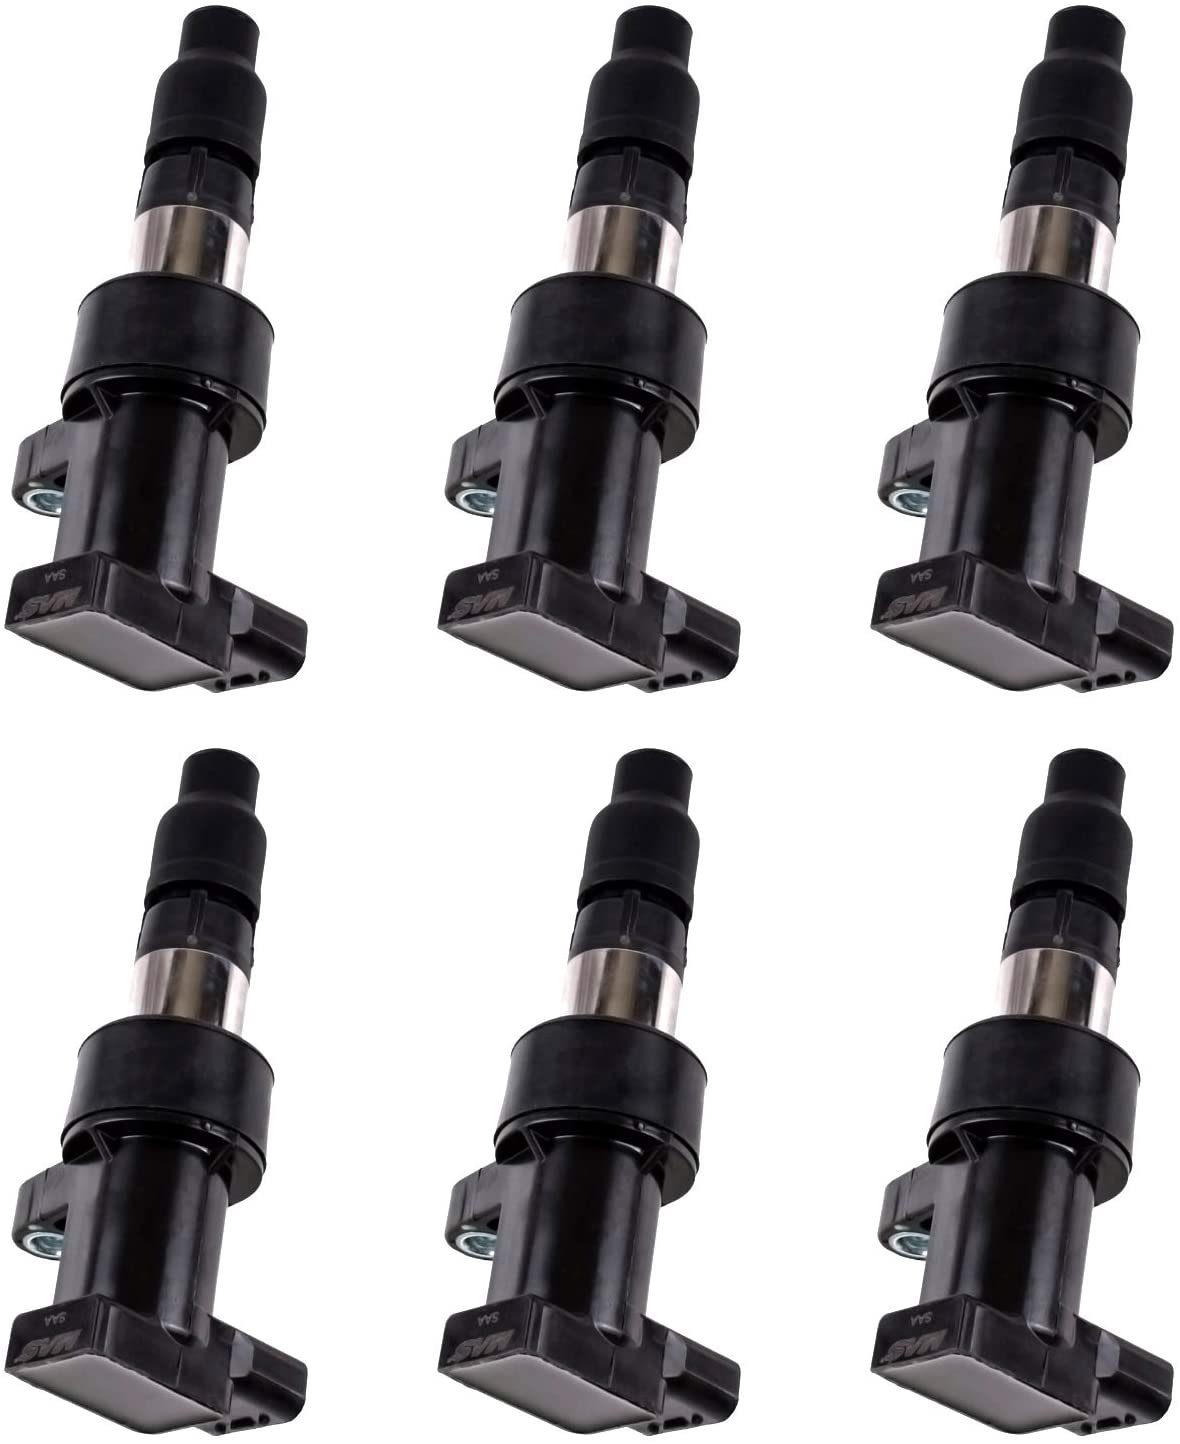 MAS Ignition Coils Pack of 6 Replacement for Jaguar 2001-2008 X-Type S-Type 2.5L 3.0L V6 Compatible with UF435 UF-435